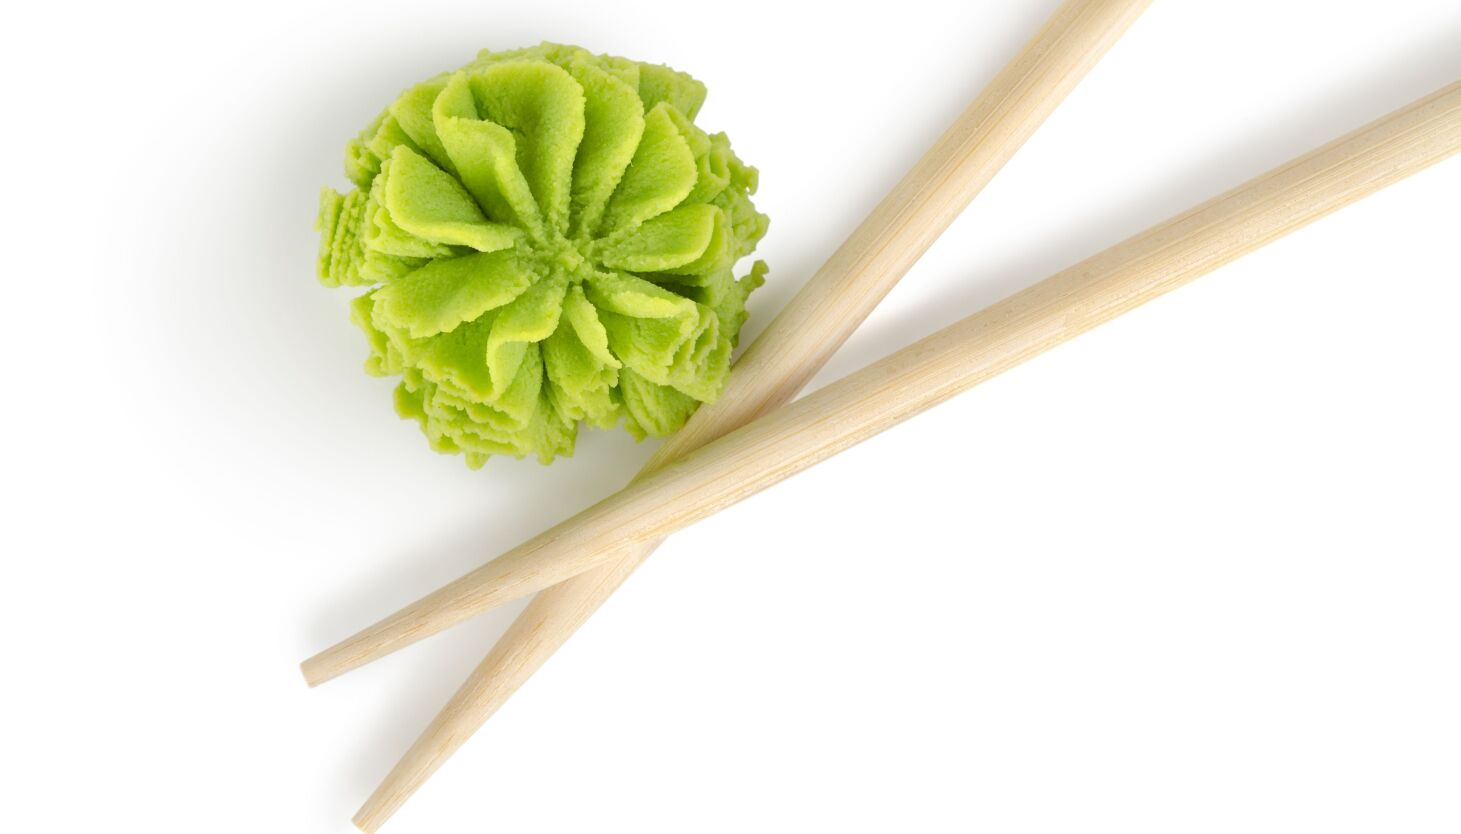 Is improving memory one of the health benefits of wasabi?